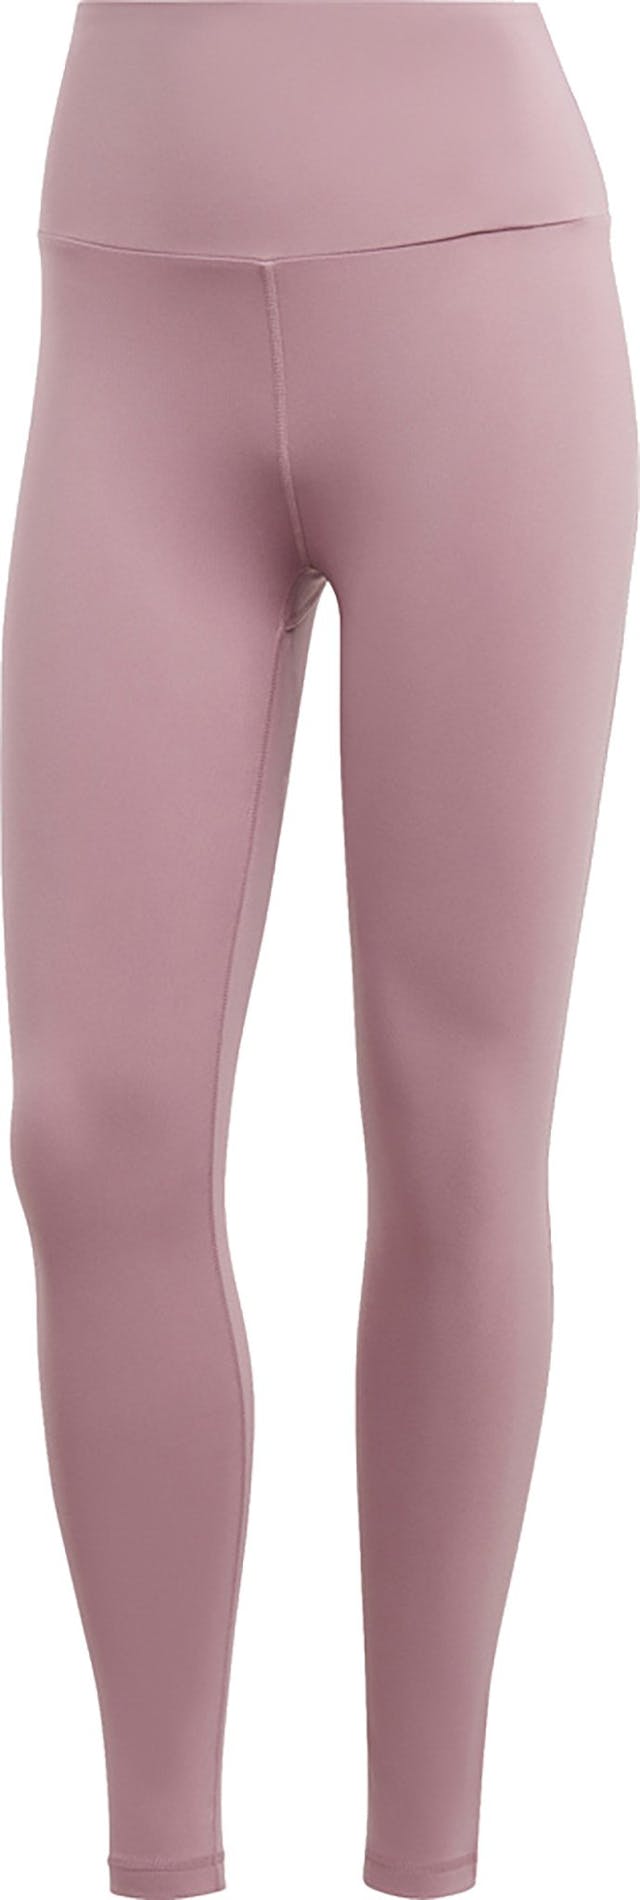 Product image for Yoga Essentials High-Waisted Legging - Women's